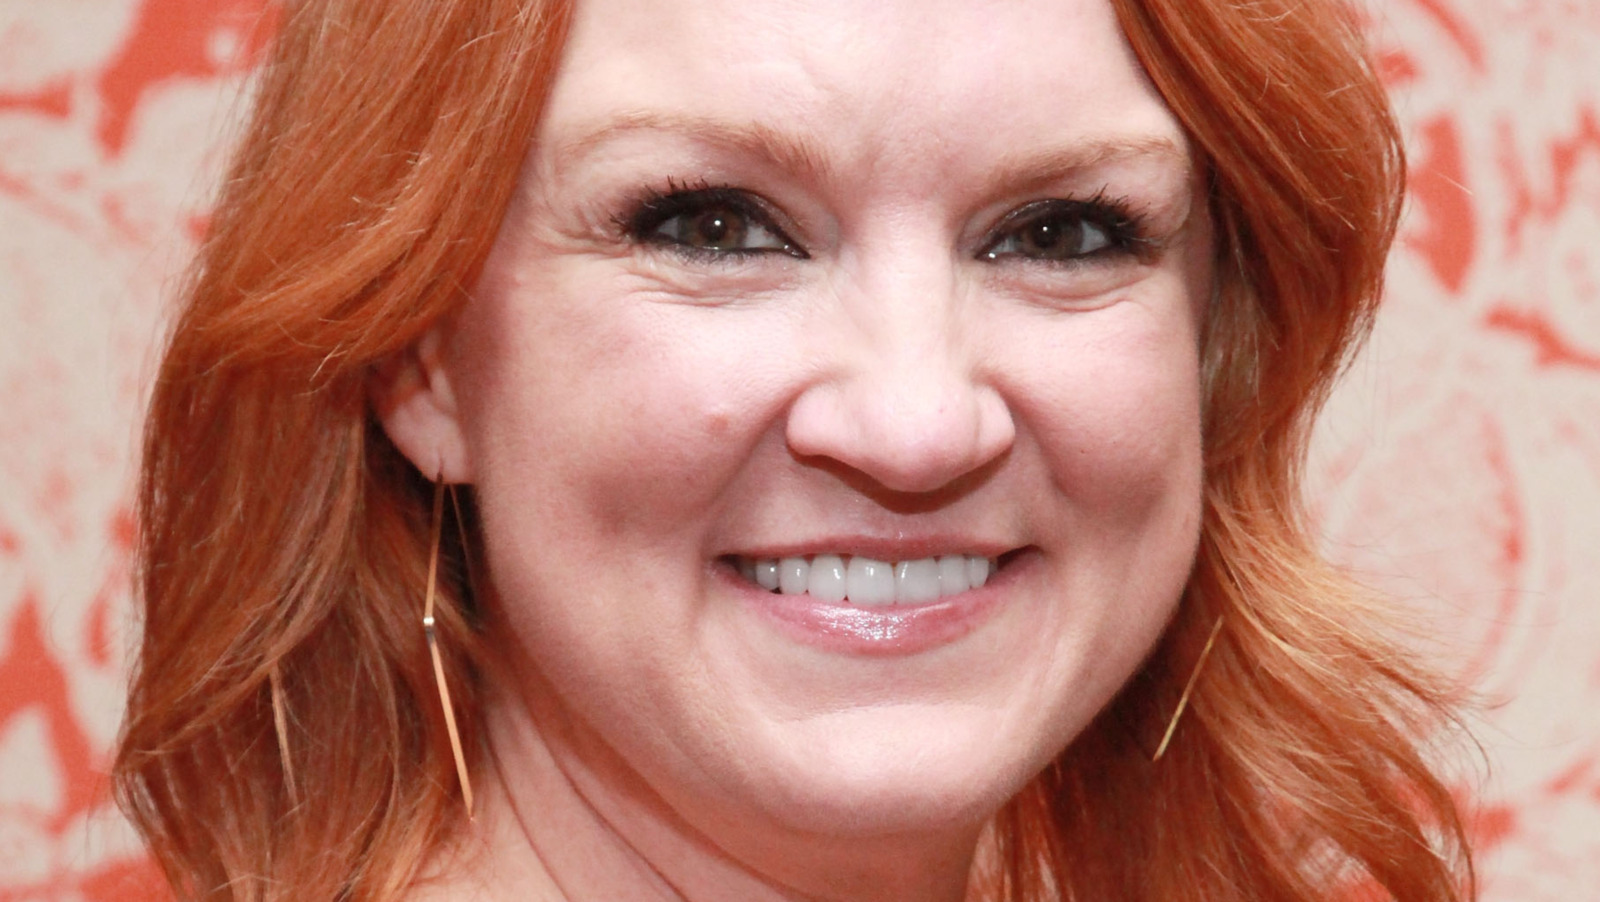 The TMI Joke Ree Drummond Made About Her Daughter's Wedding